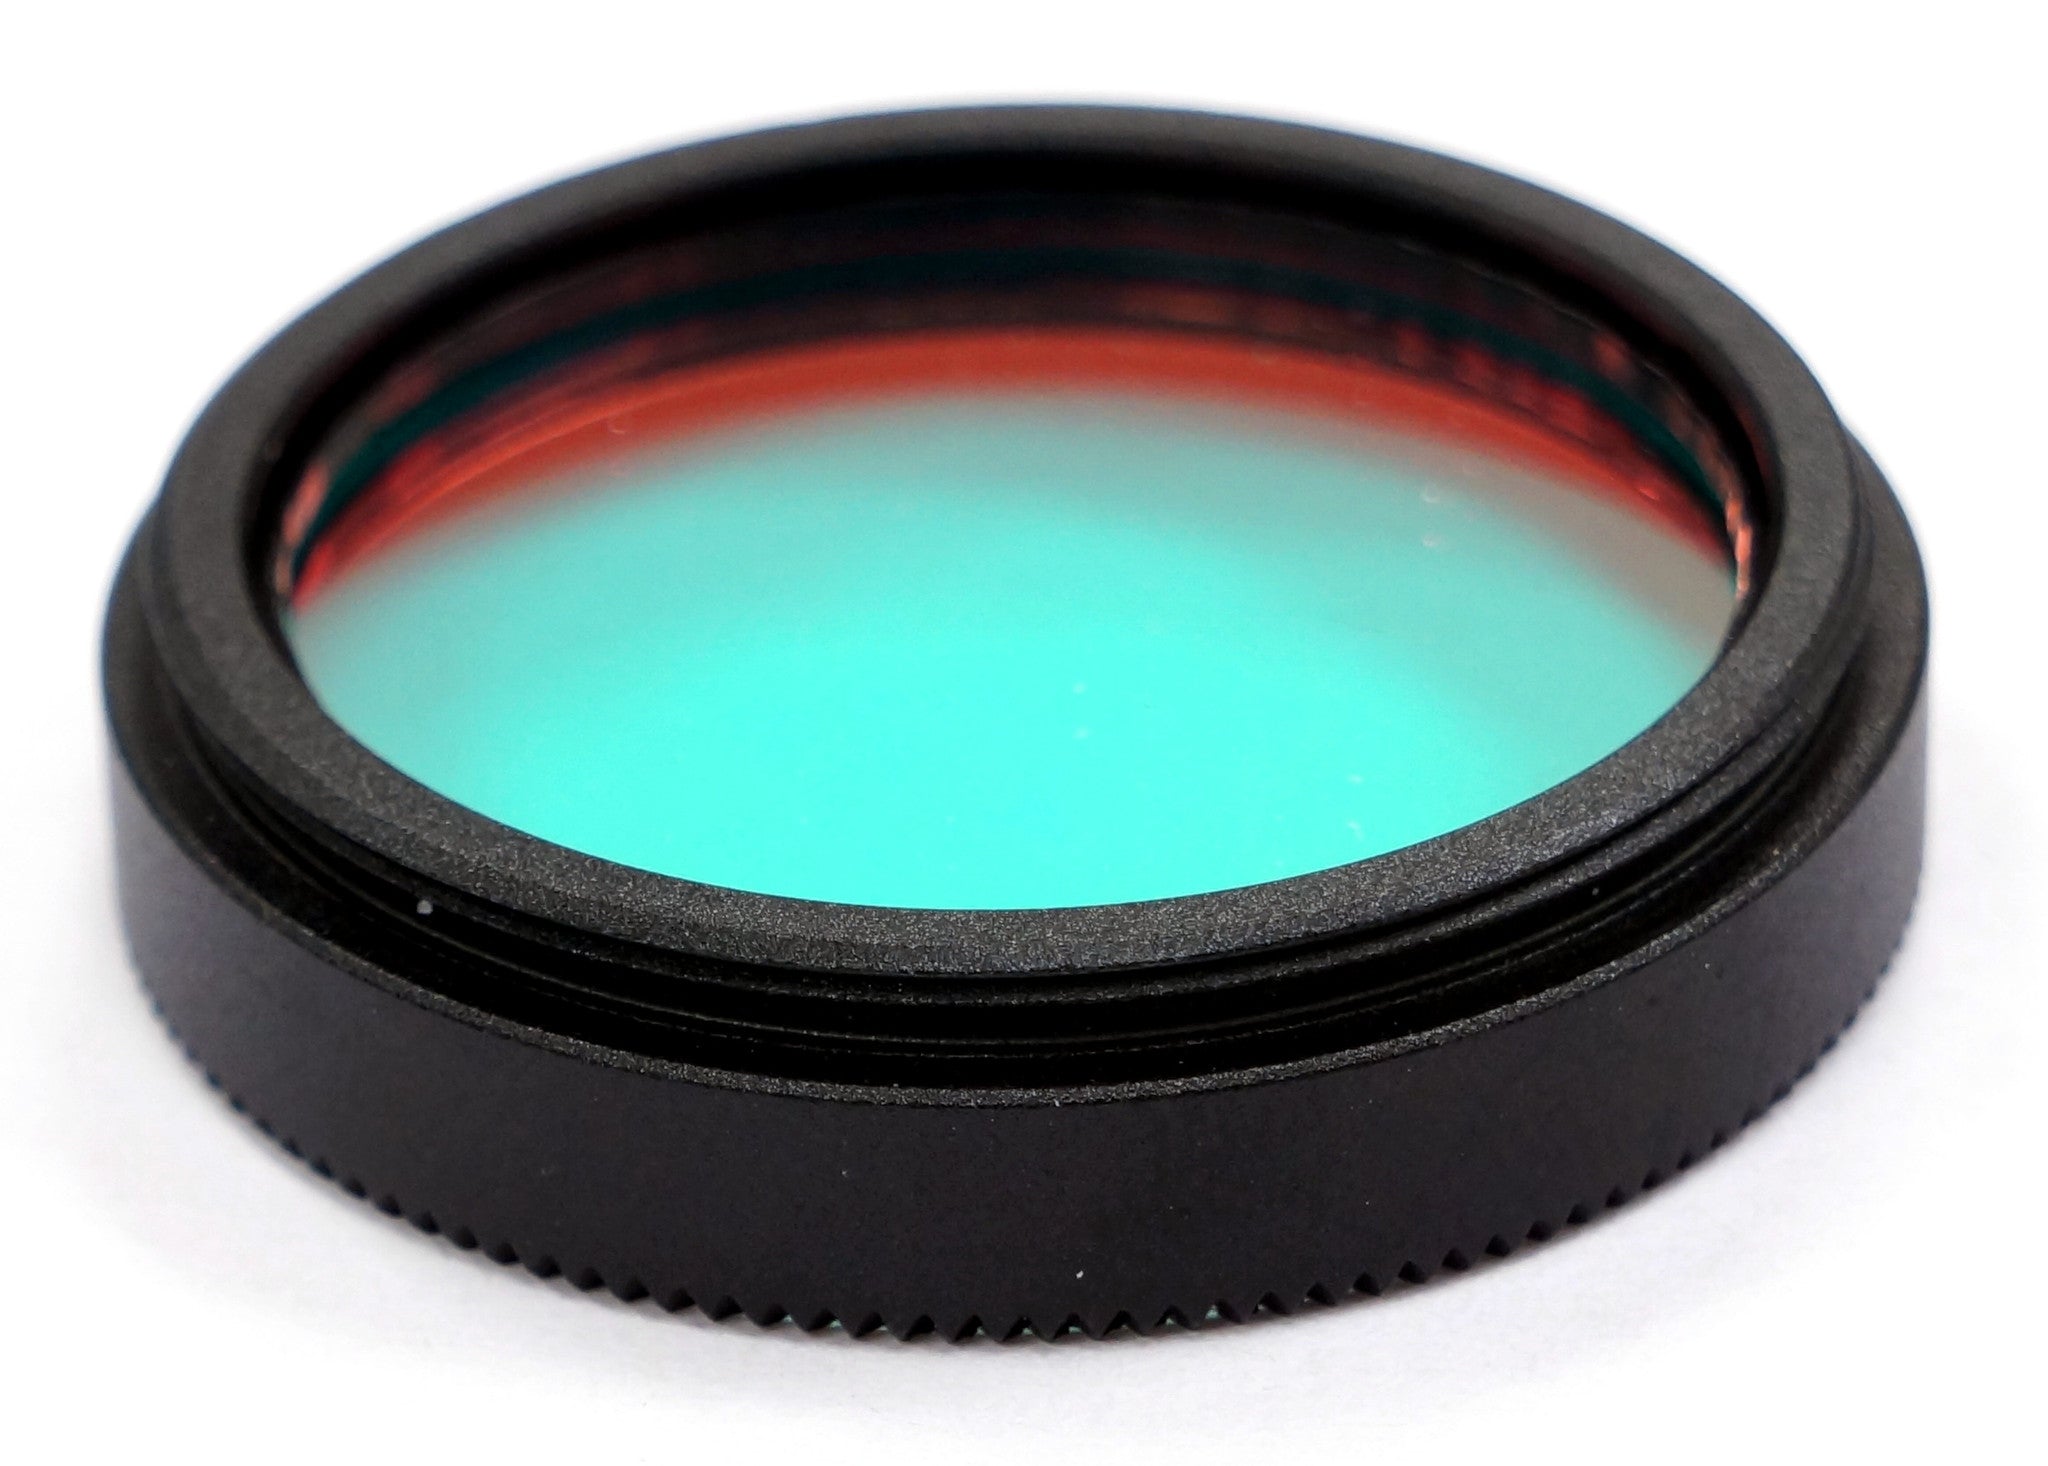 Visible (RGB) + Infrared (850nm) Light Filter